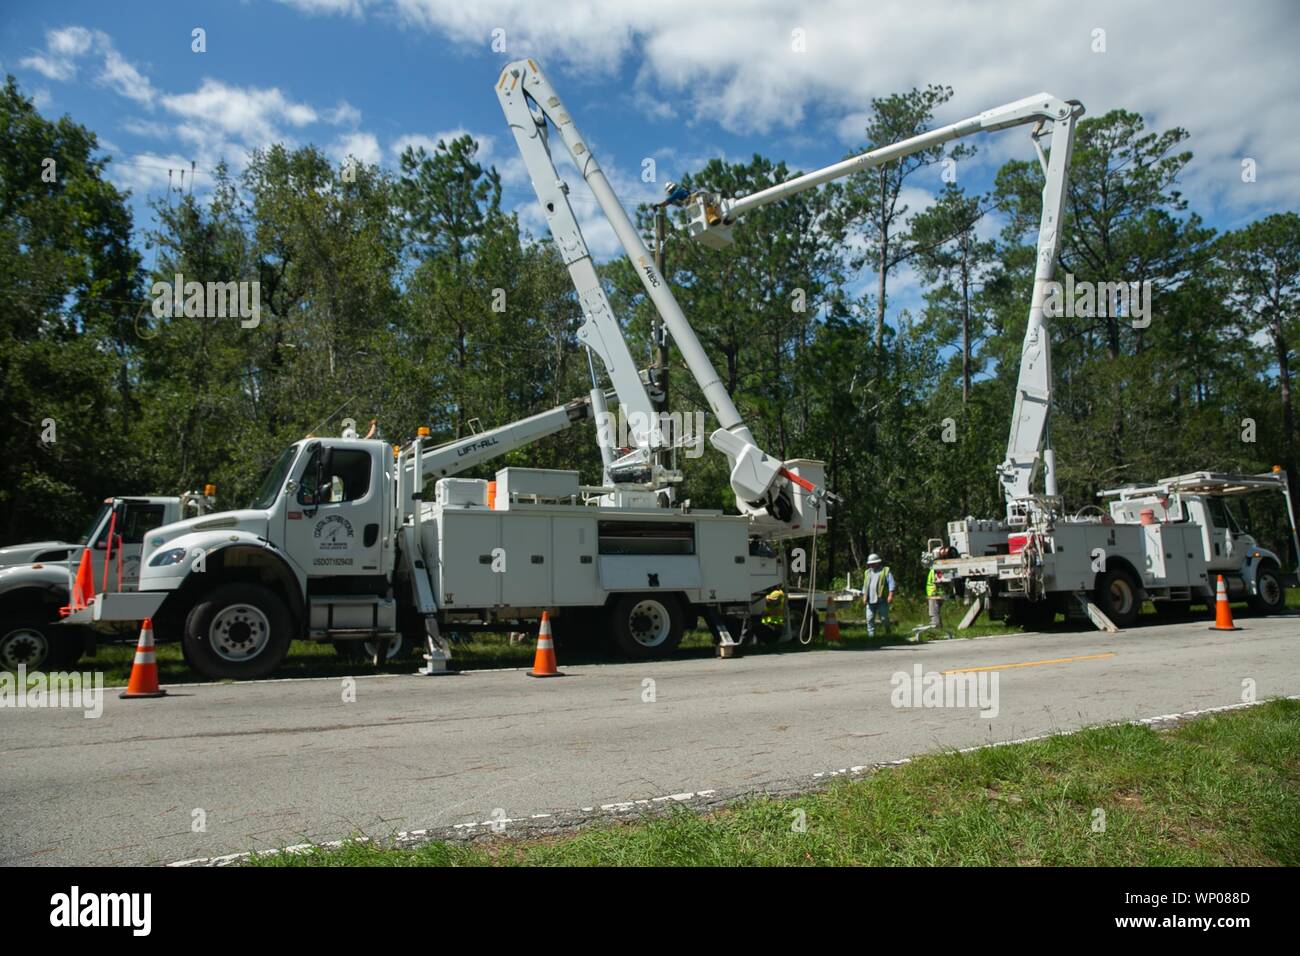 Contracted construction workers replace a damaged power line at Marine Corps Base Camp Lejeune, North Carolina, Sept. 6, 2019. Hurricane Dorian passed by the coast of North Carolina resulting in powerful winds and heavy rain which caused light damage to base facilities. (U.S. Marine Corps photo by Sgt. Abrey Liggins) Stock Photo